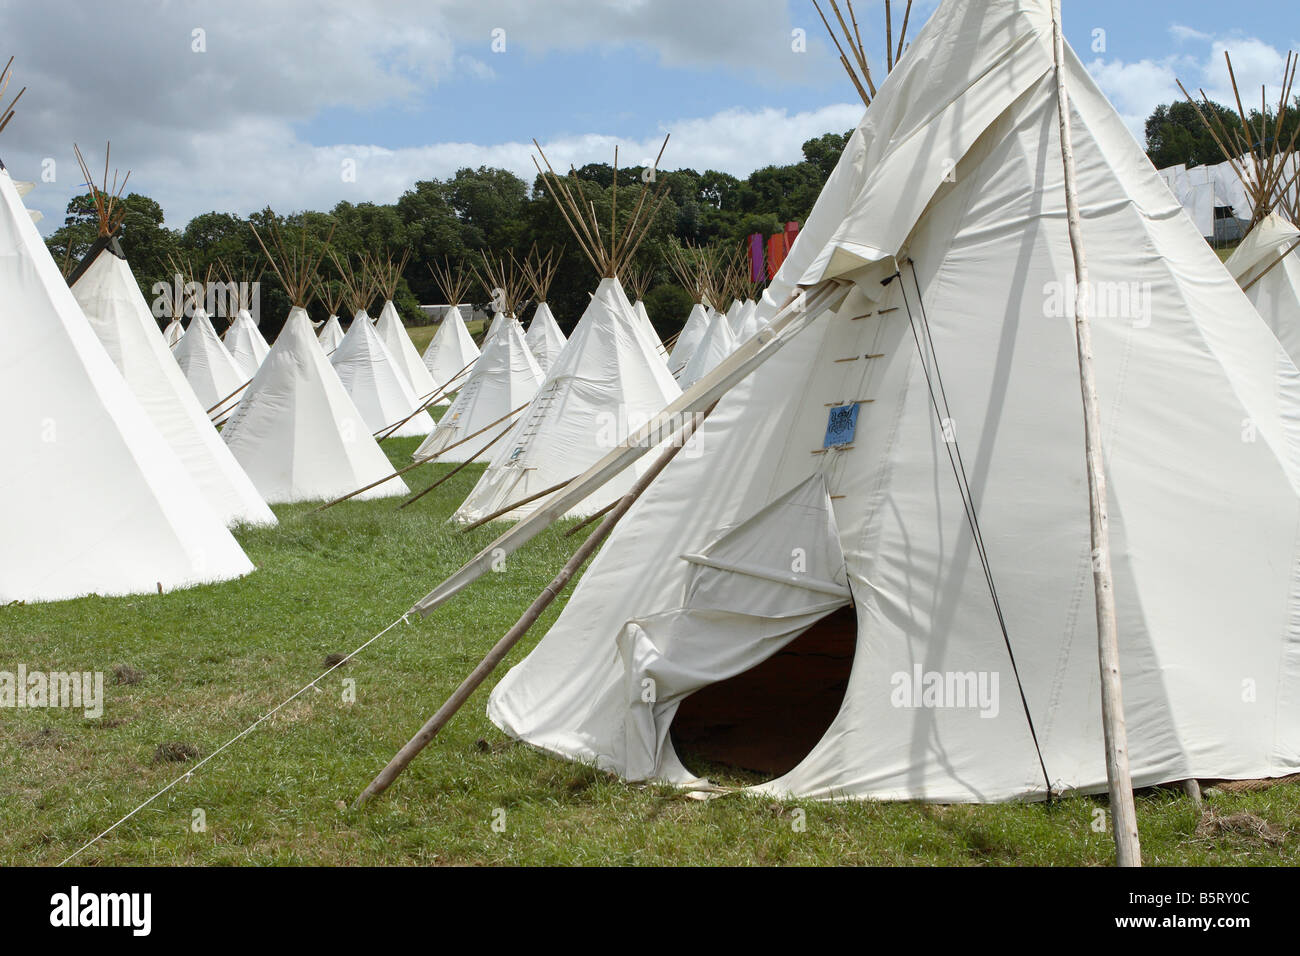 Tipi tents at outdoor festival Stock Photo